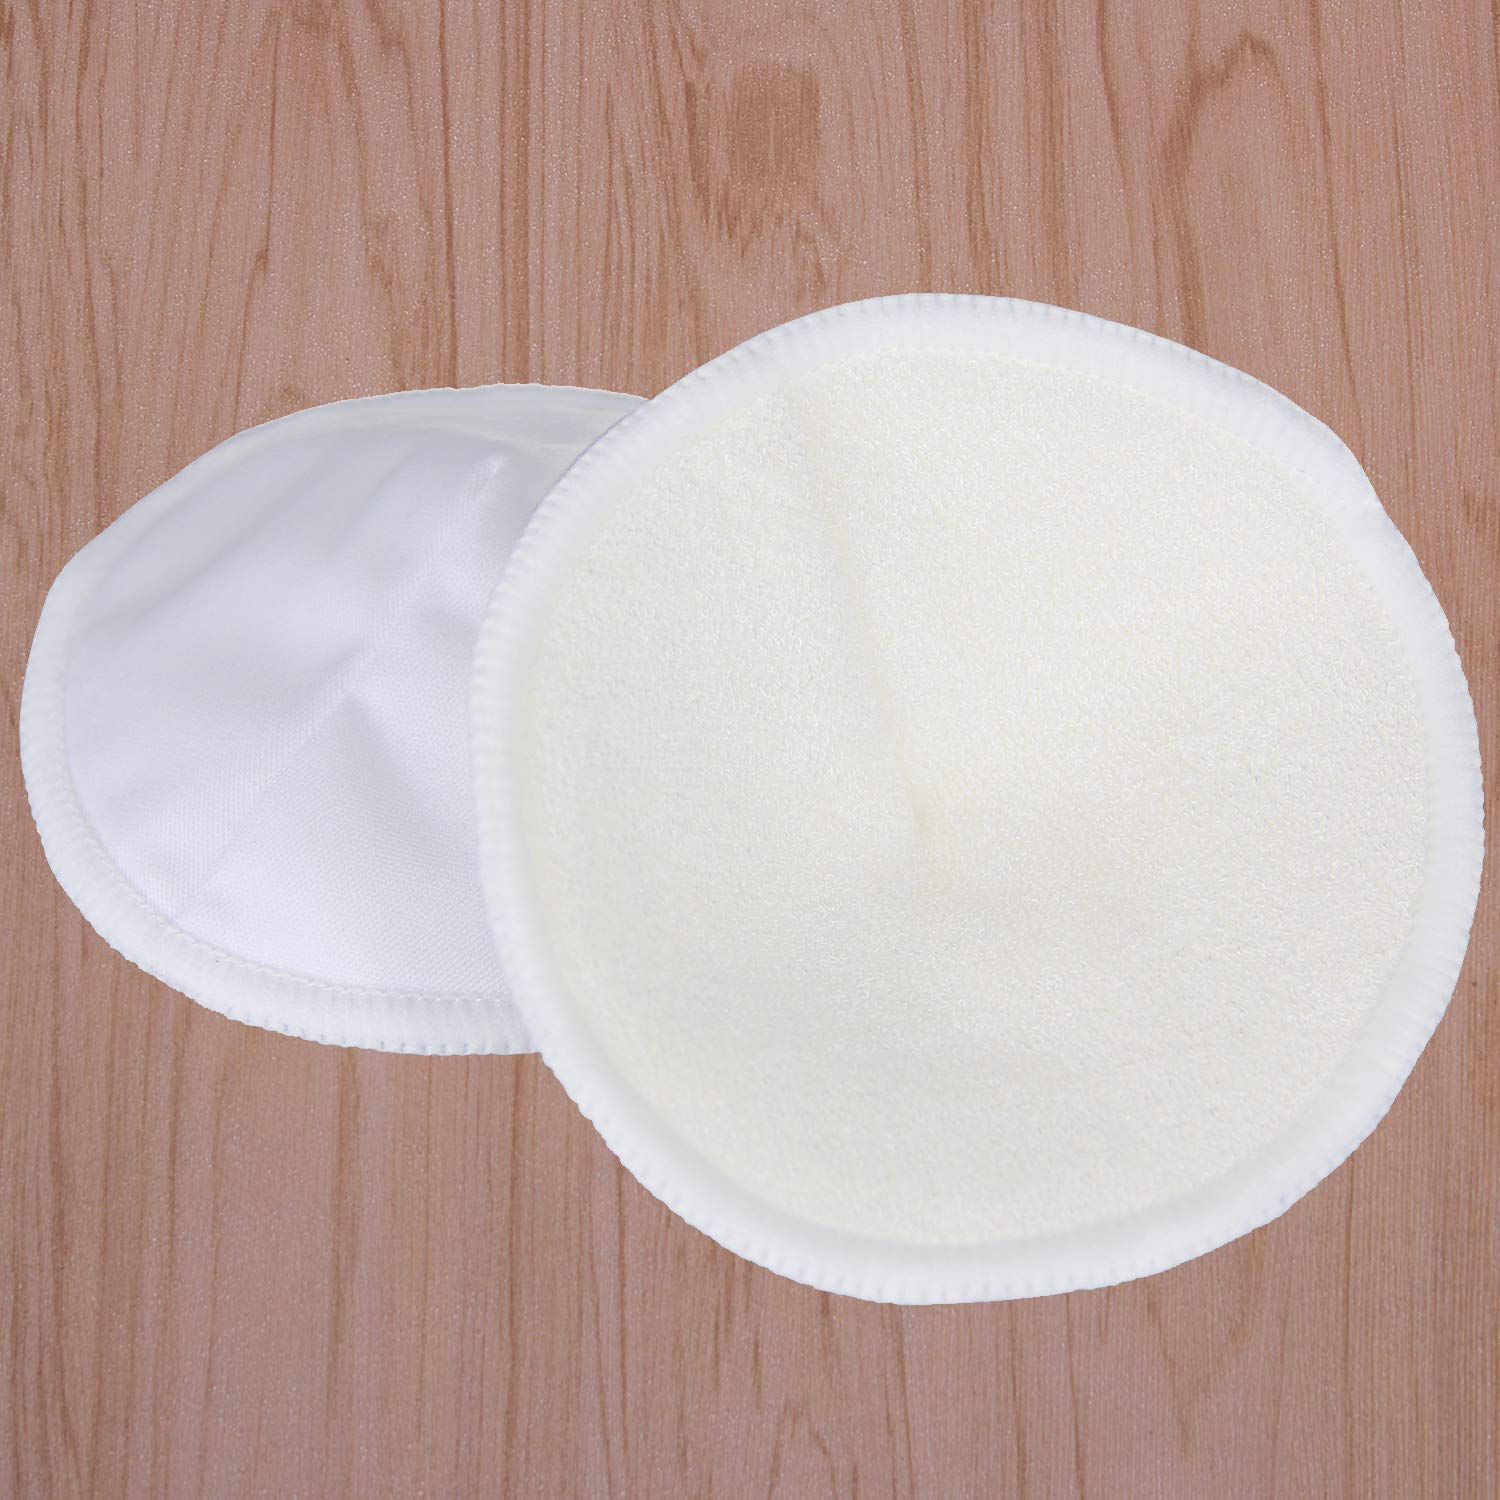 F62D 2 Pcs New Bamboo Breast Pad Nursing Pads For Mum Washable